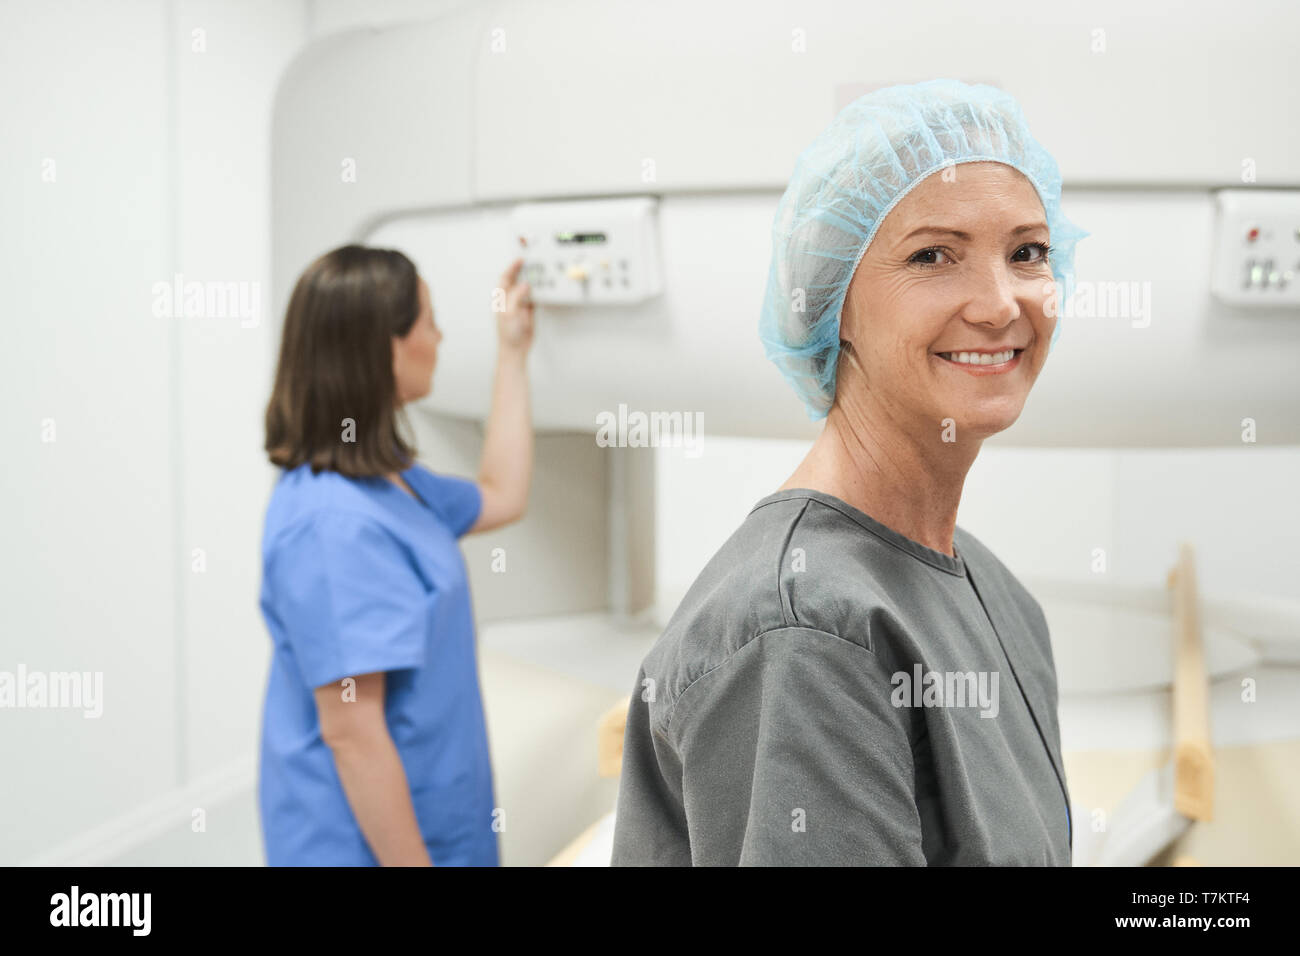 Portrait of happy middle aged patient looking at camera before MRI in hospital lab. Woman smiling in clinic before medical treatment. Stock Photo